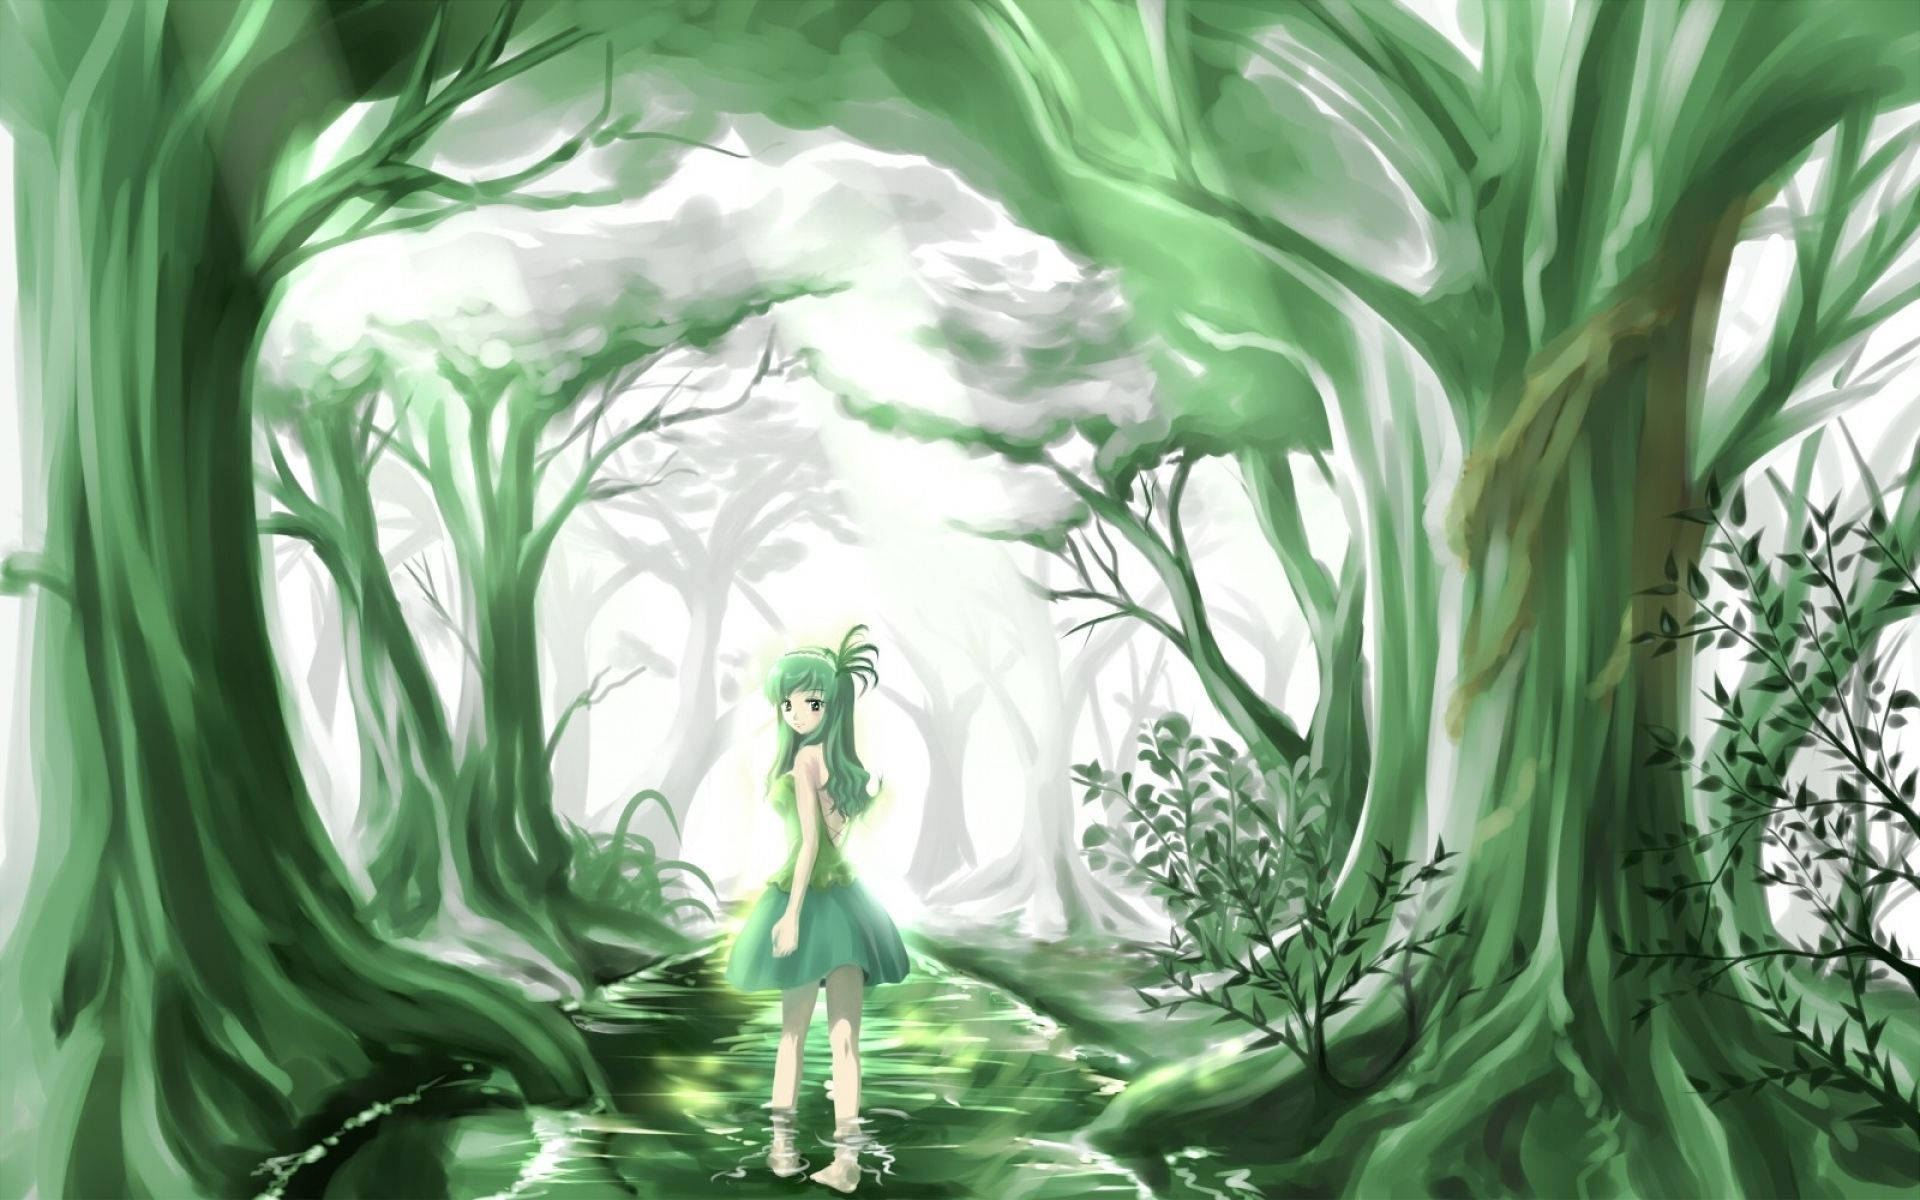 Anime Girl Swing Forest Green Eyes 4K HD Anime Girl Wallpapers  HD  Wallpapers  ID 77132